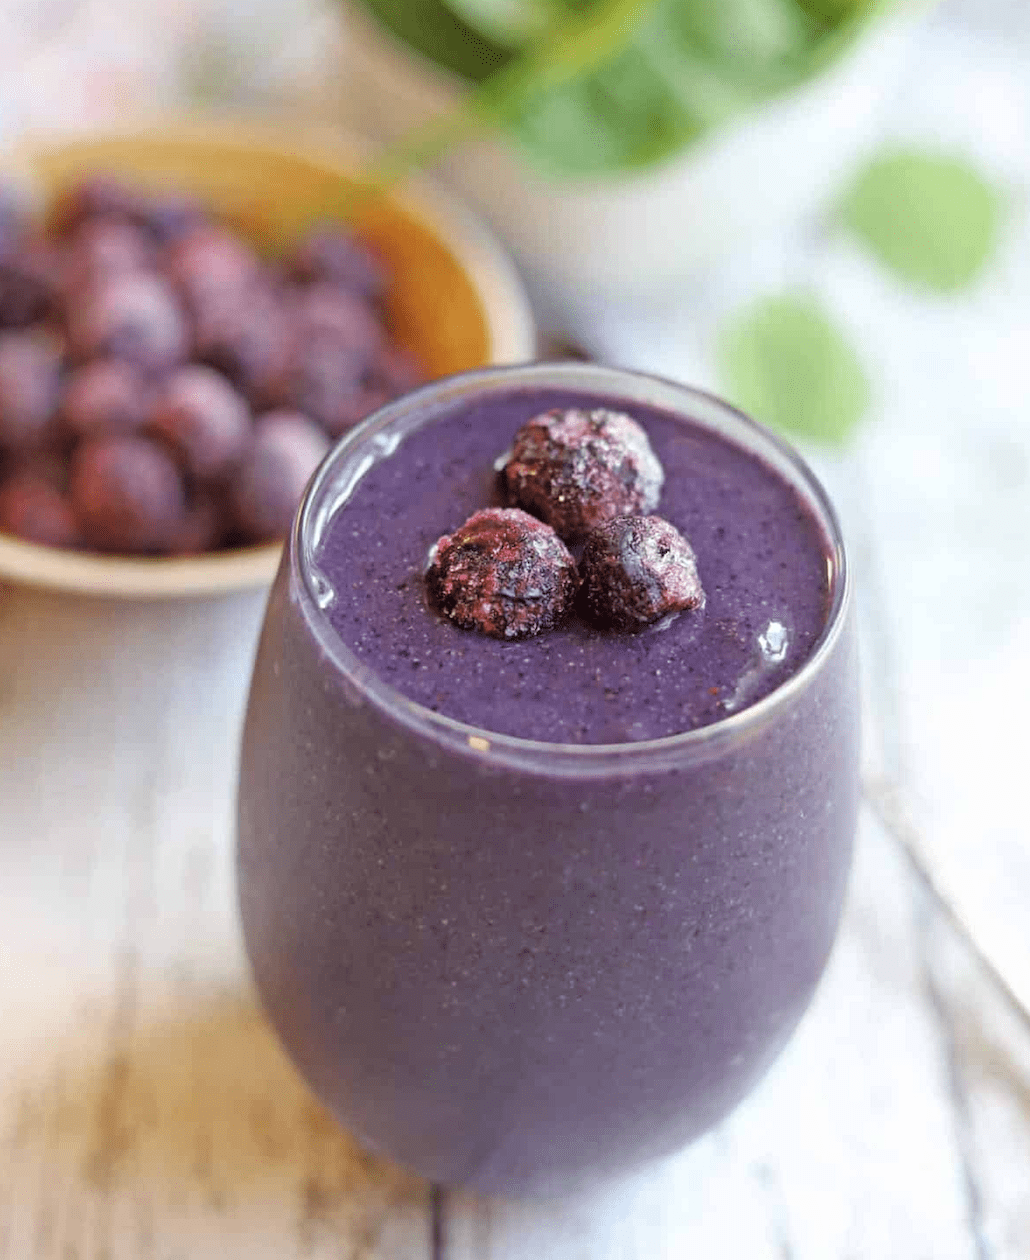 Blueberry spinach dairy-free protein shake